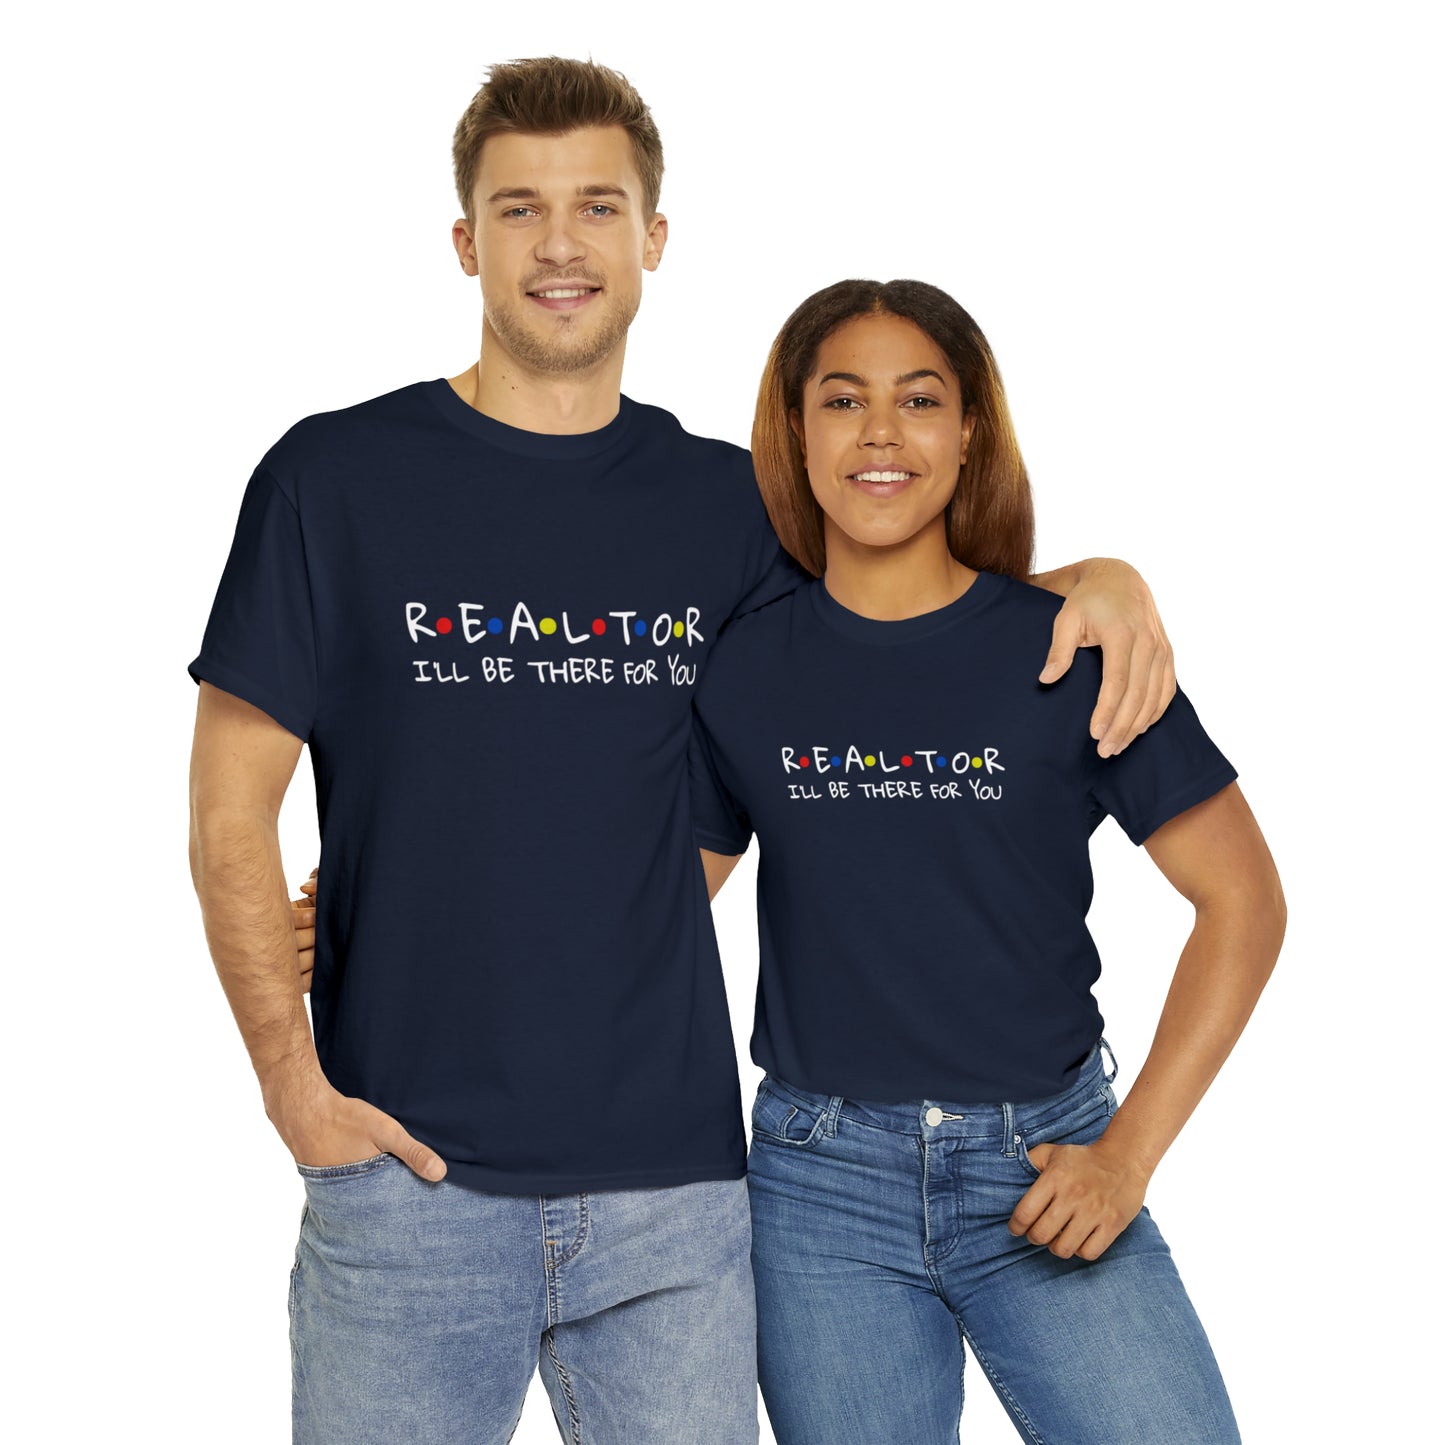 Unisex Men's or Women's T-Shirt "REALTOR I'LL BE THERE FOR YOU" tee shirt (SRBEE)